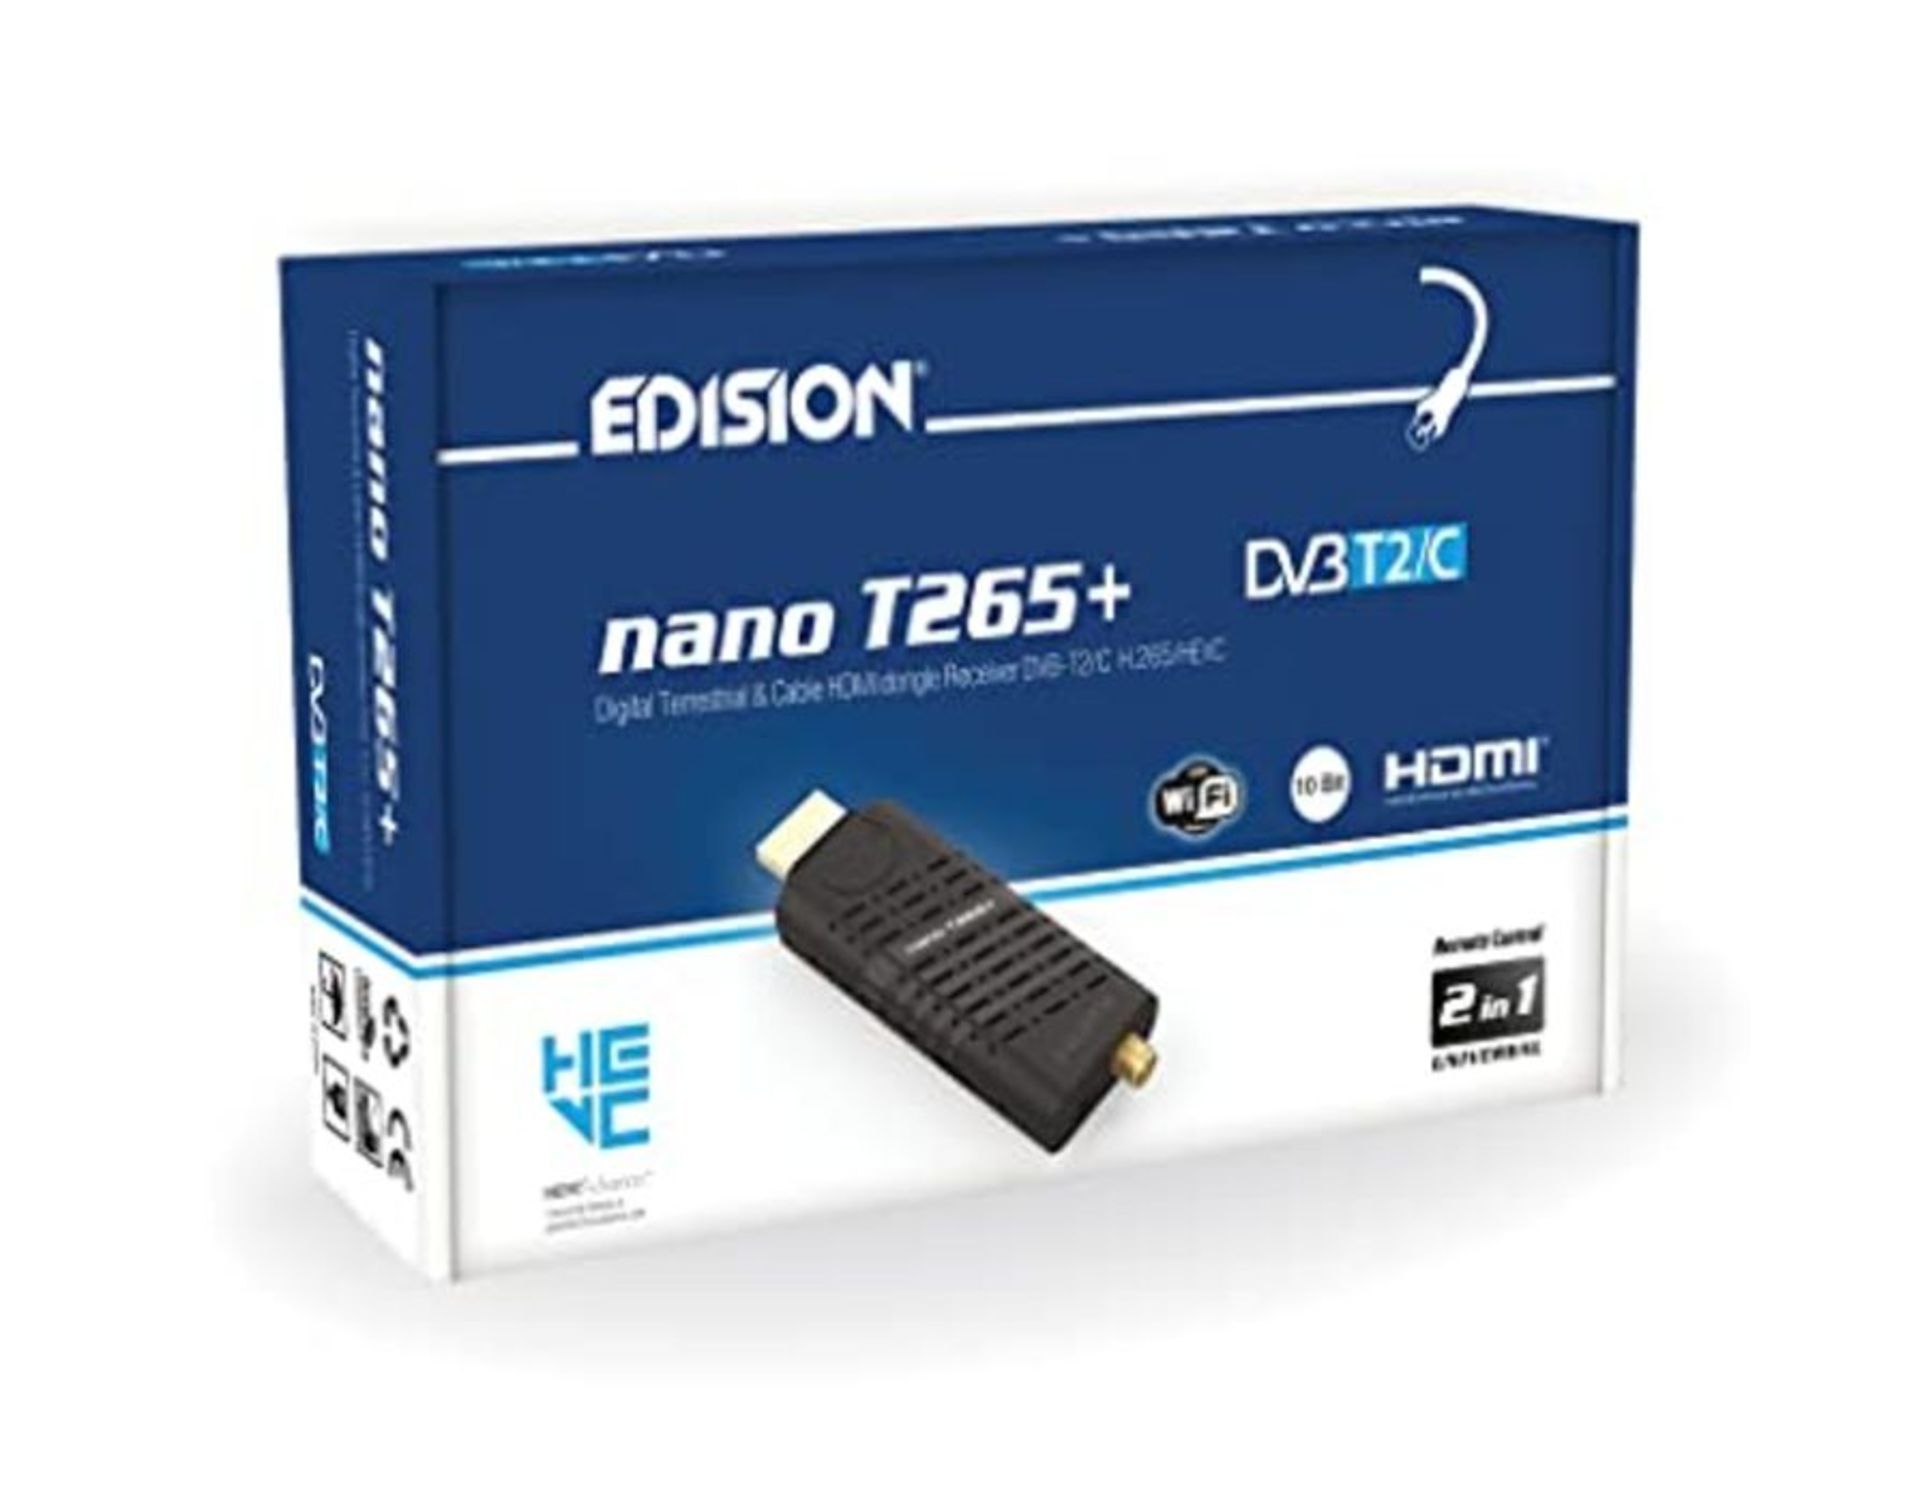 Edision NANO T265+ Terrestrial and Cable HDMI dongle Receiver, DVB-T2/C, H265 HEVC, FT